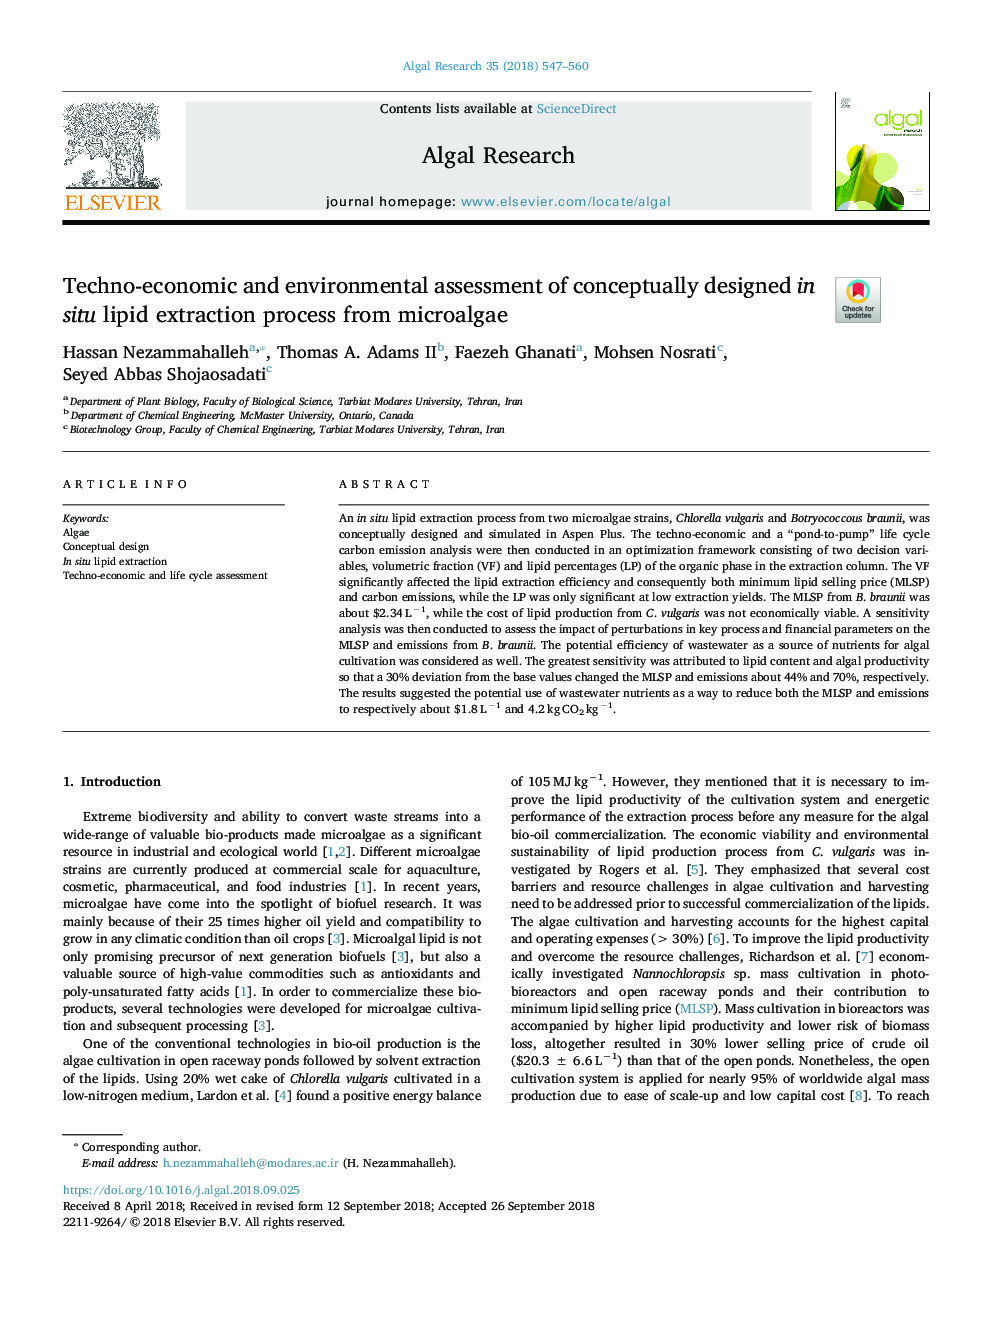 Techno-economic and environmental assessment of conceptually designed in situ lipid extraction process from microalgae